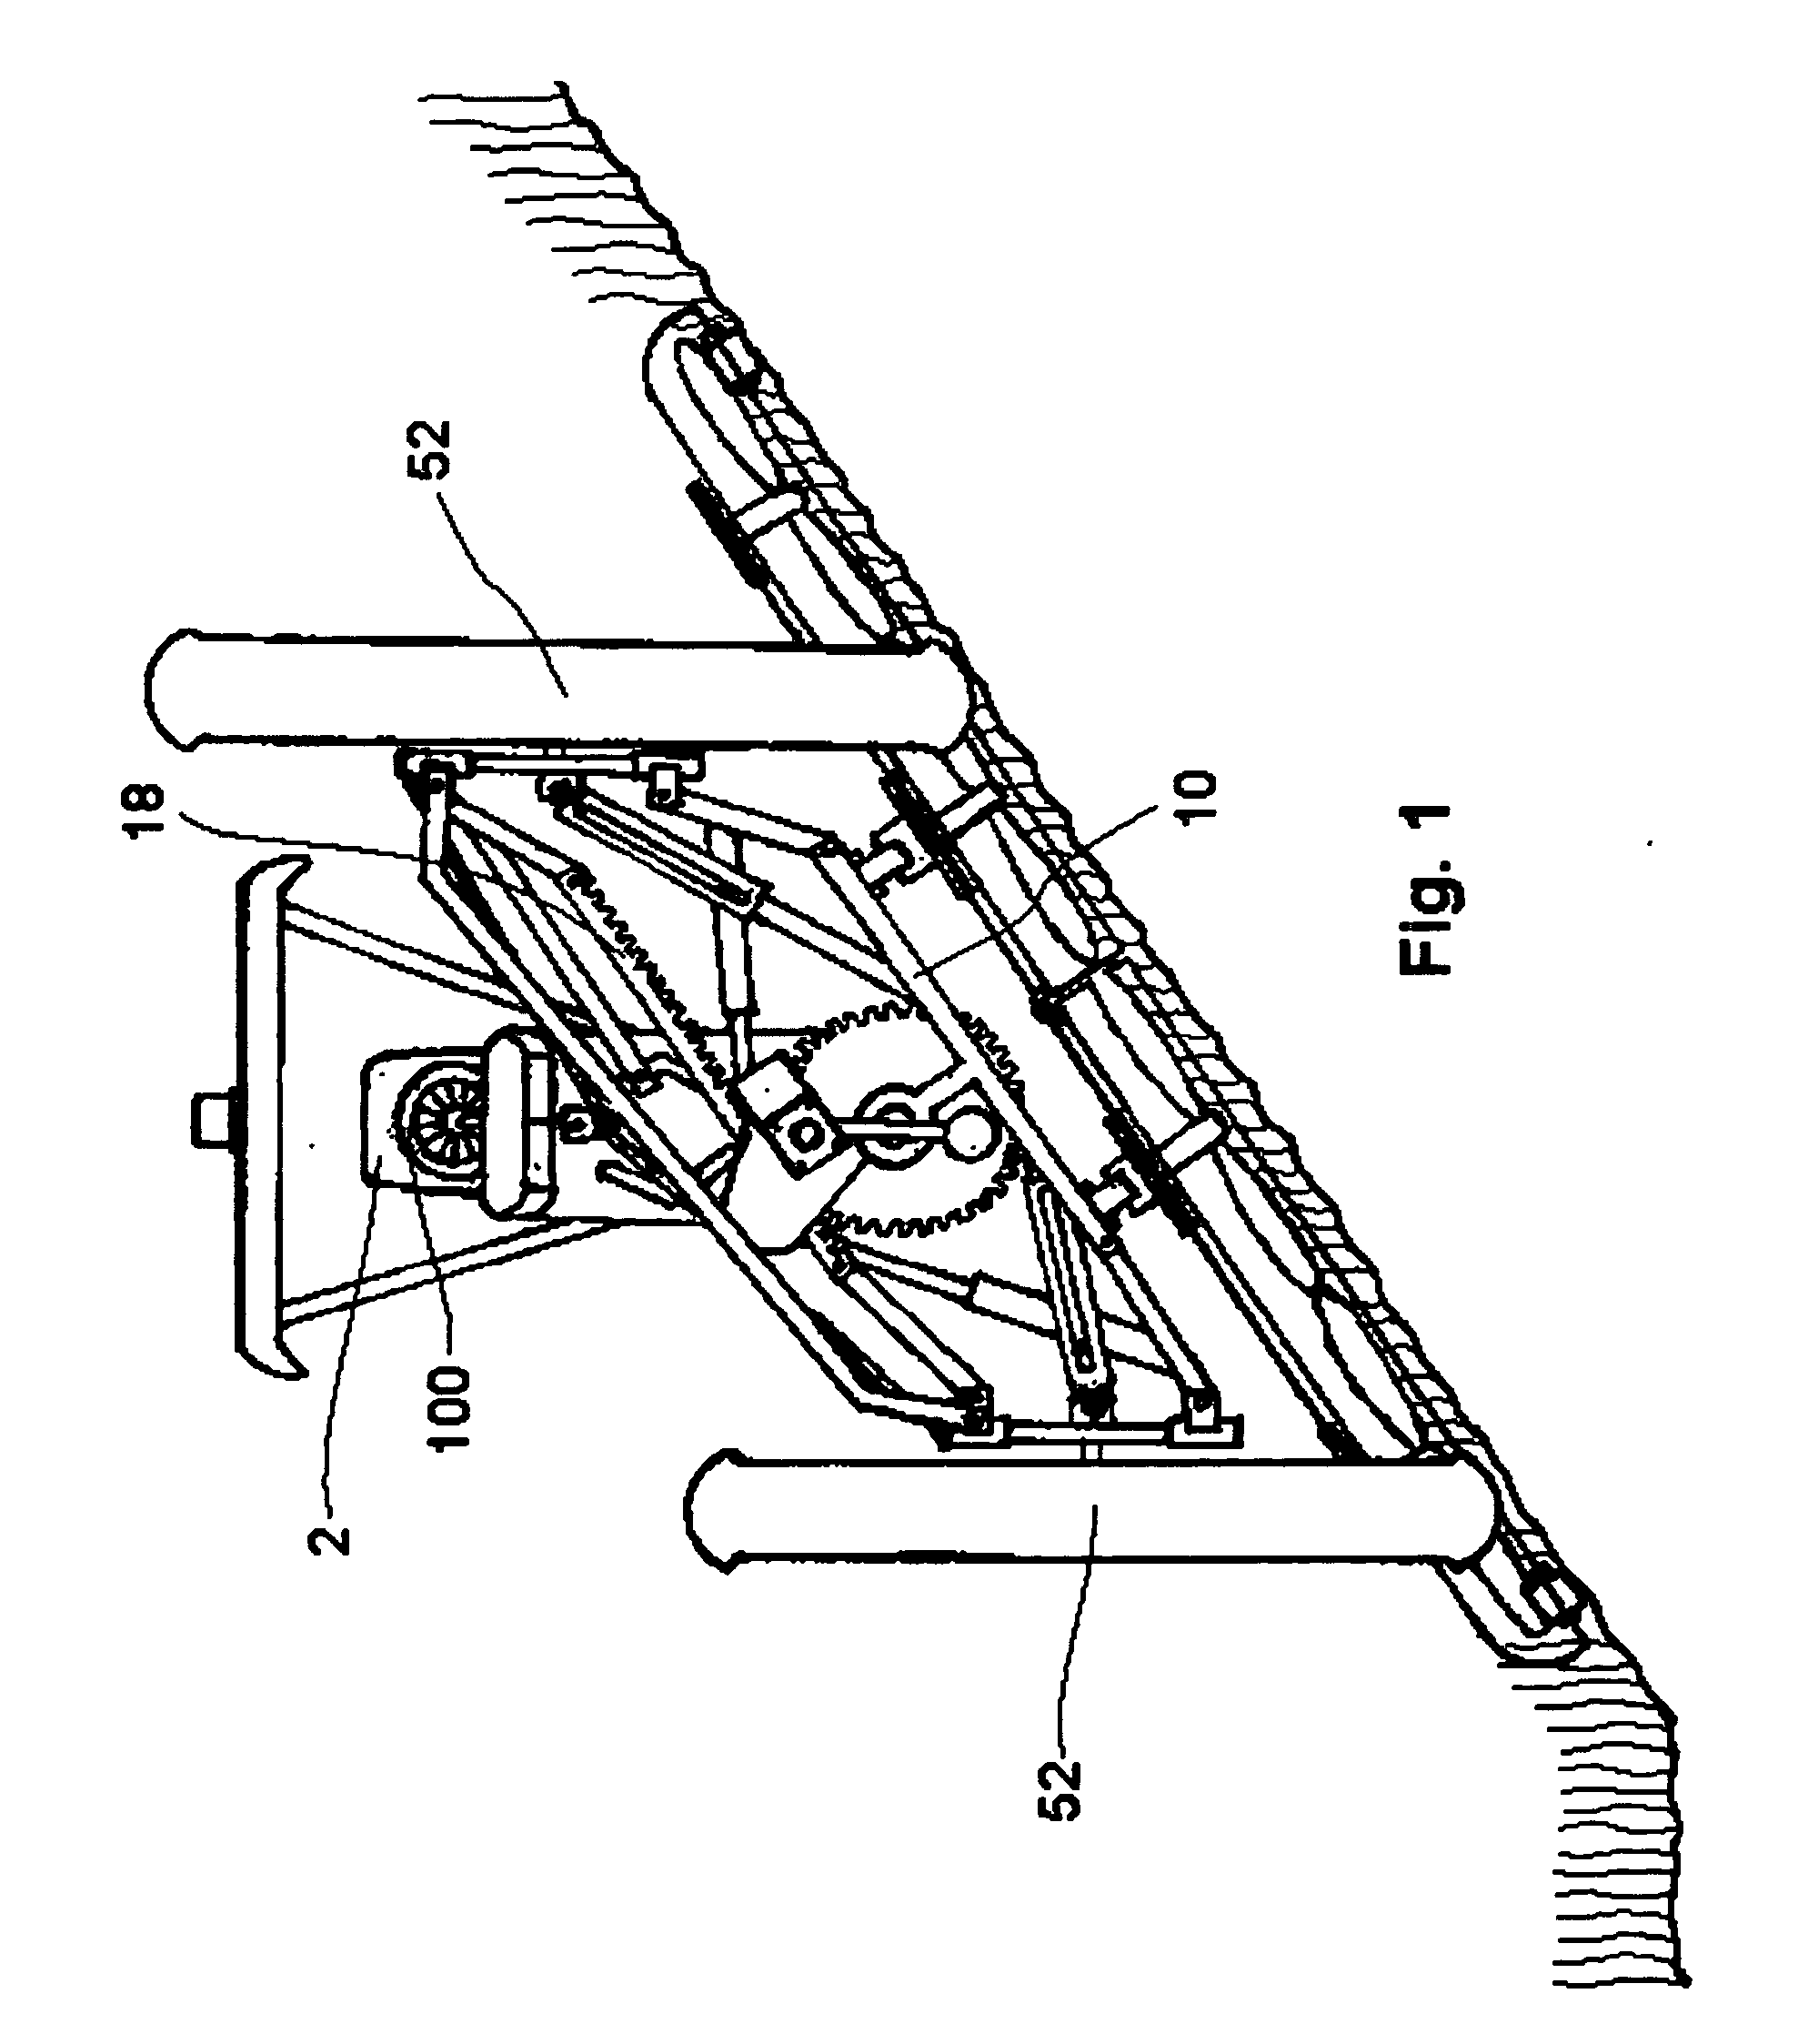 Four wheel drive stationary body vehicle having controlled wheel and passenger compartment lateral lean with independent steering